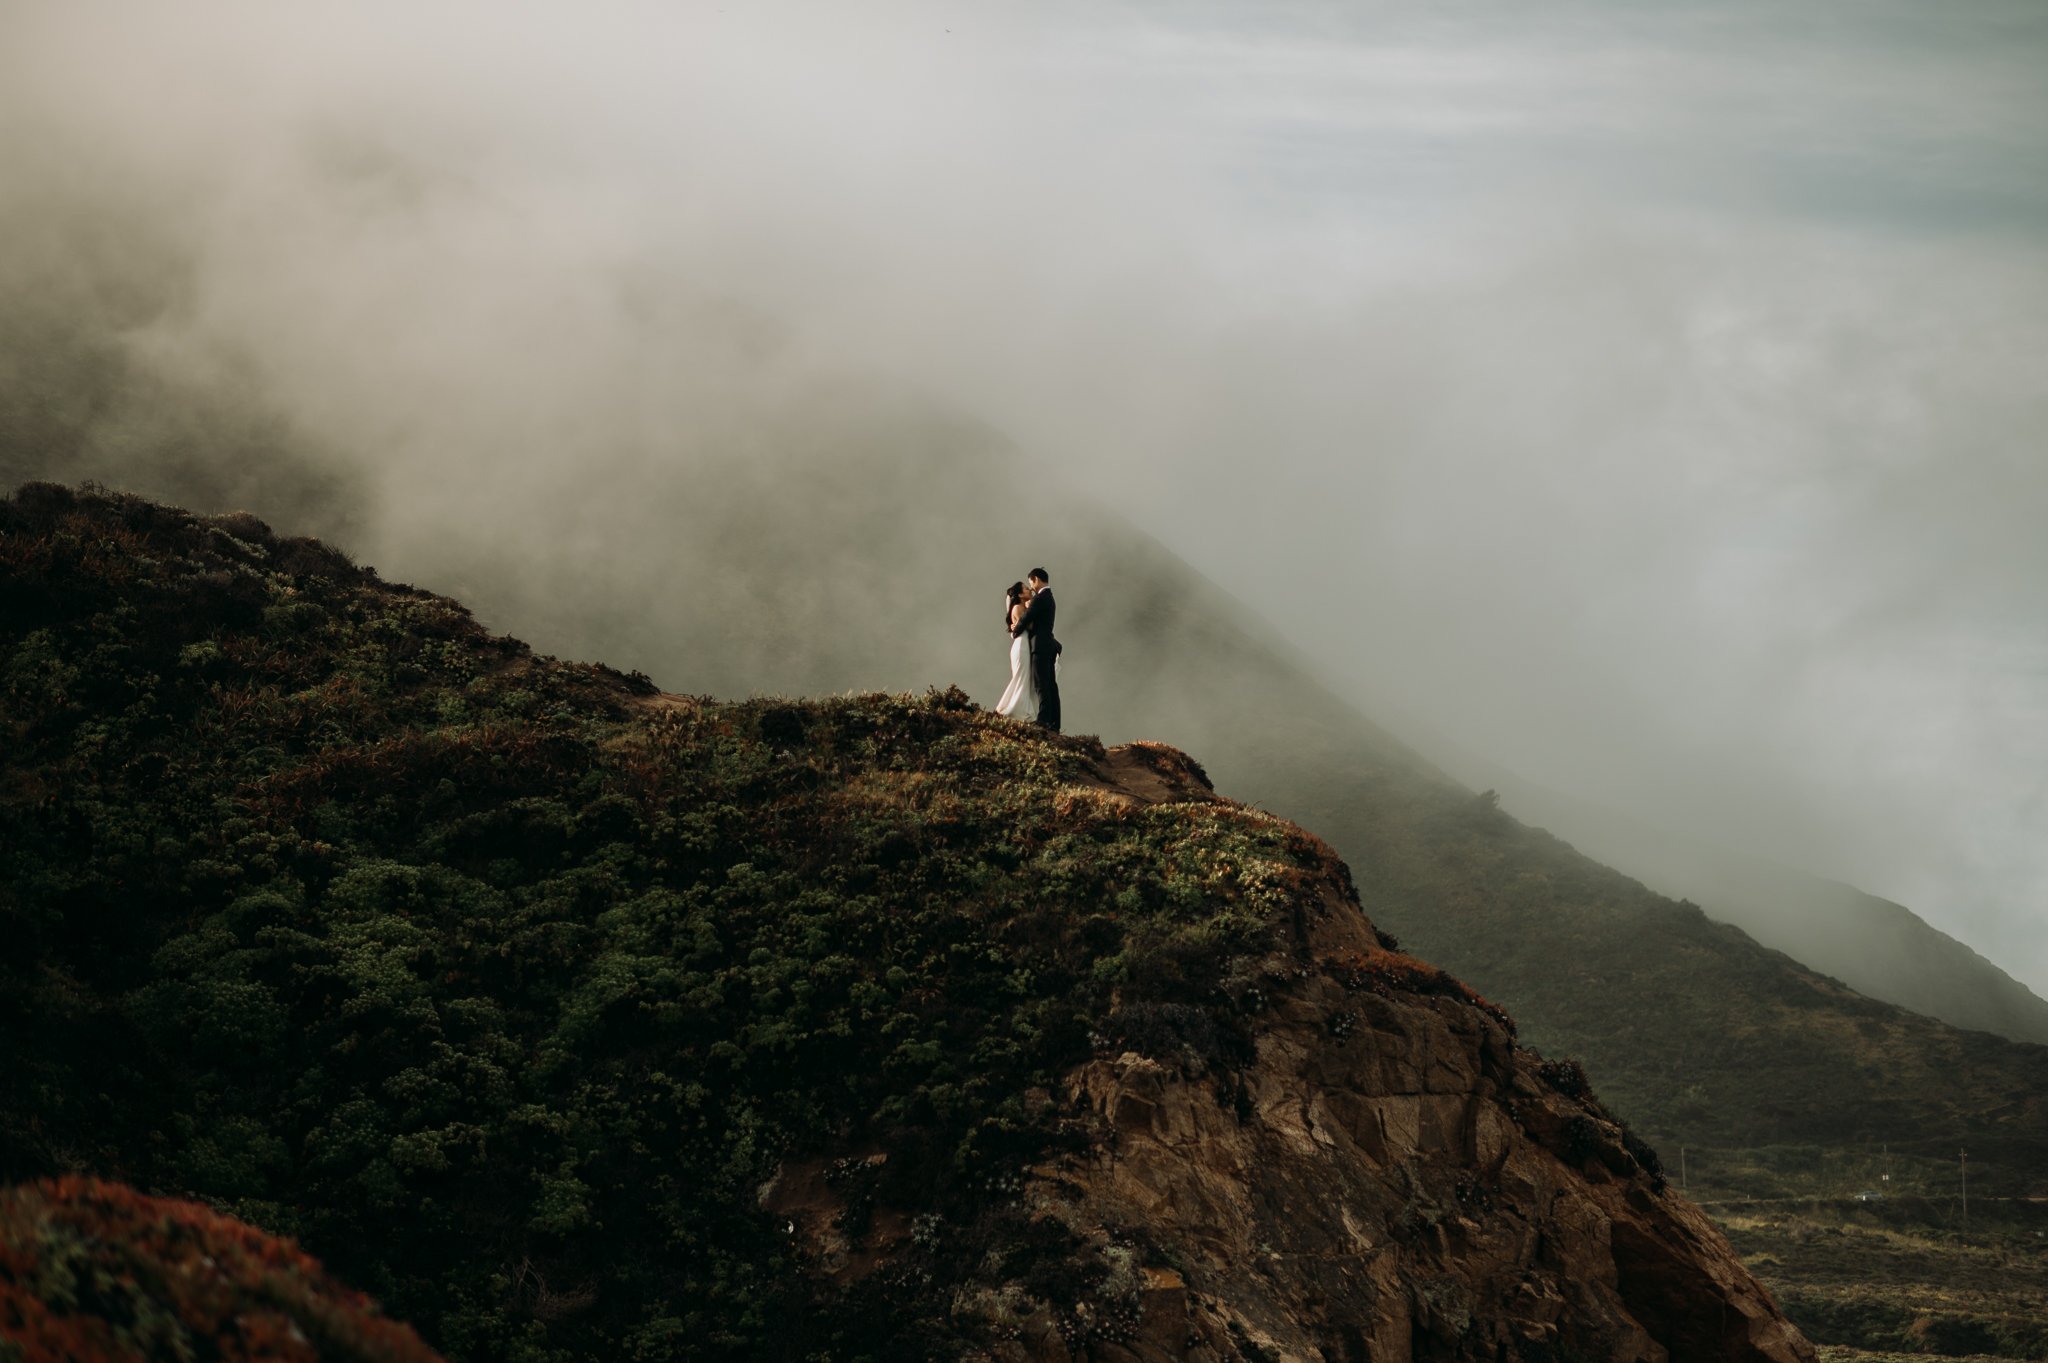 Elopement couple in wedding attire hugging on cliff in with ocean and fog drenched hills Big Sur California